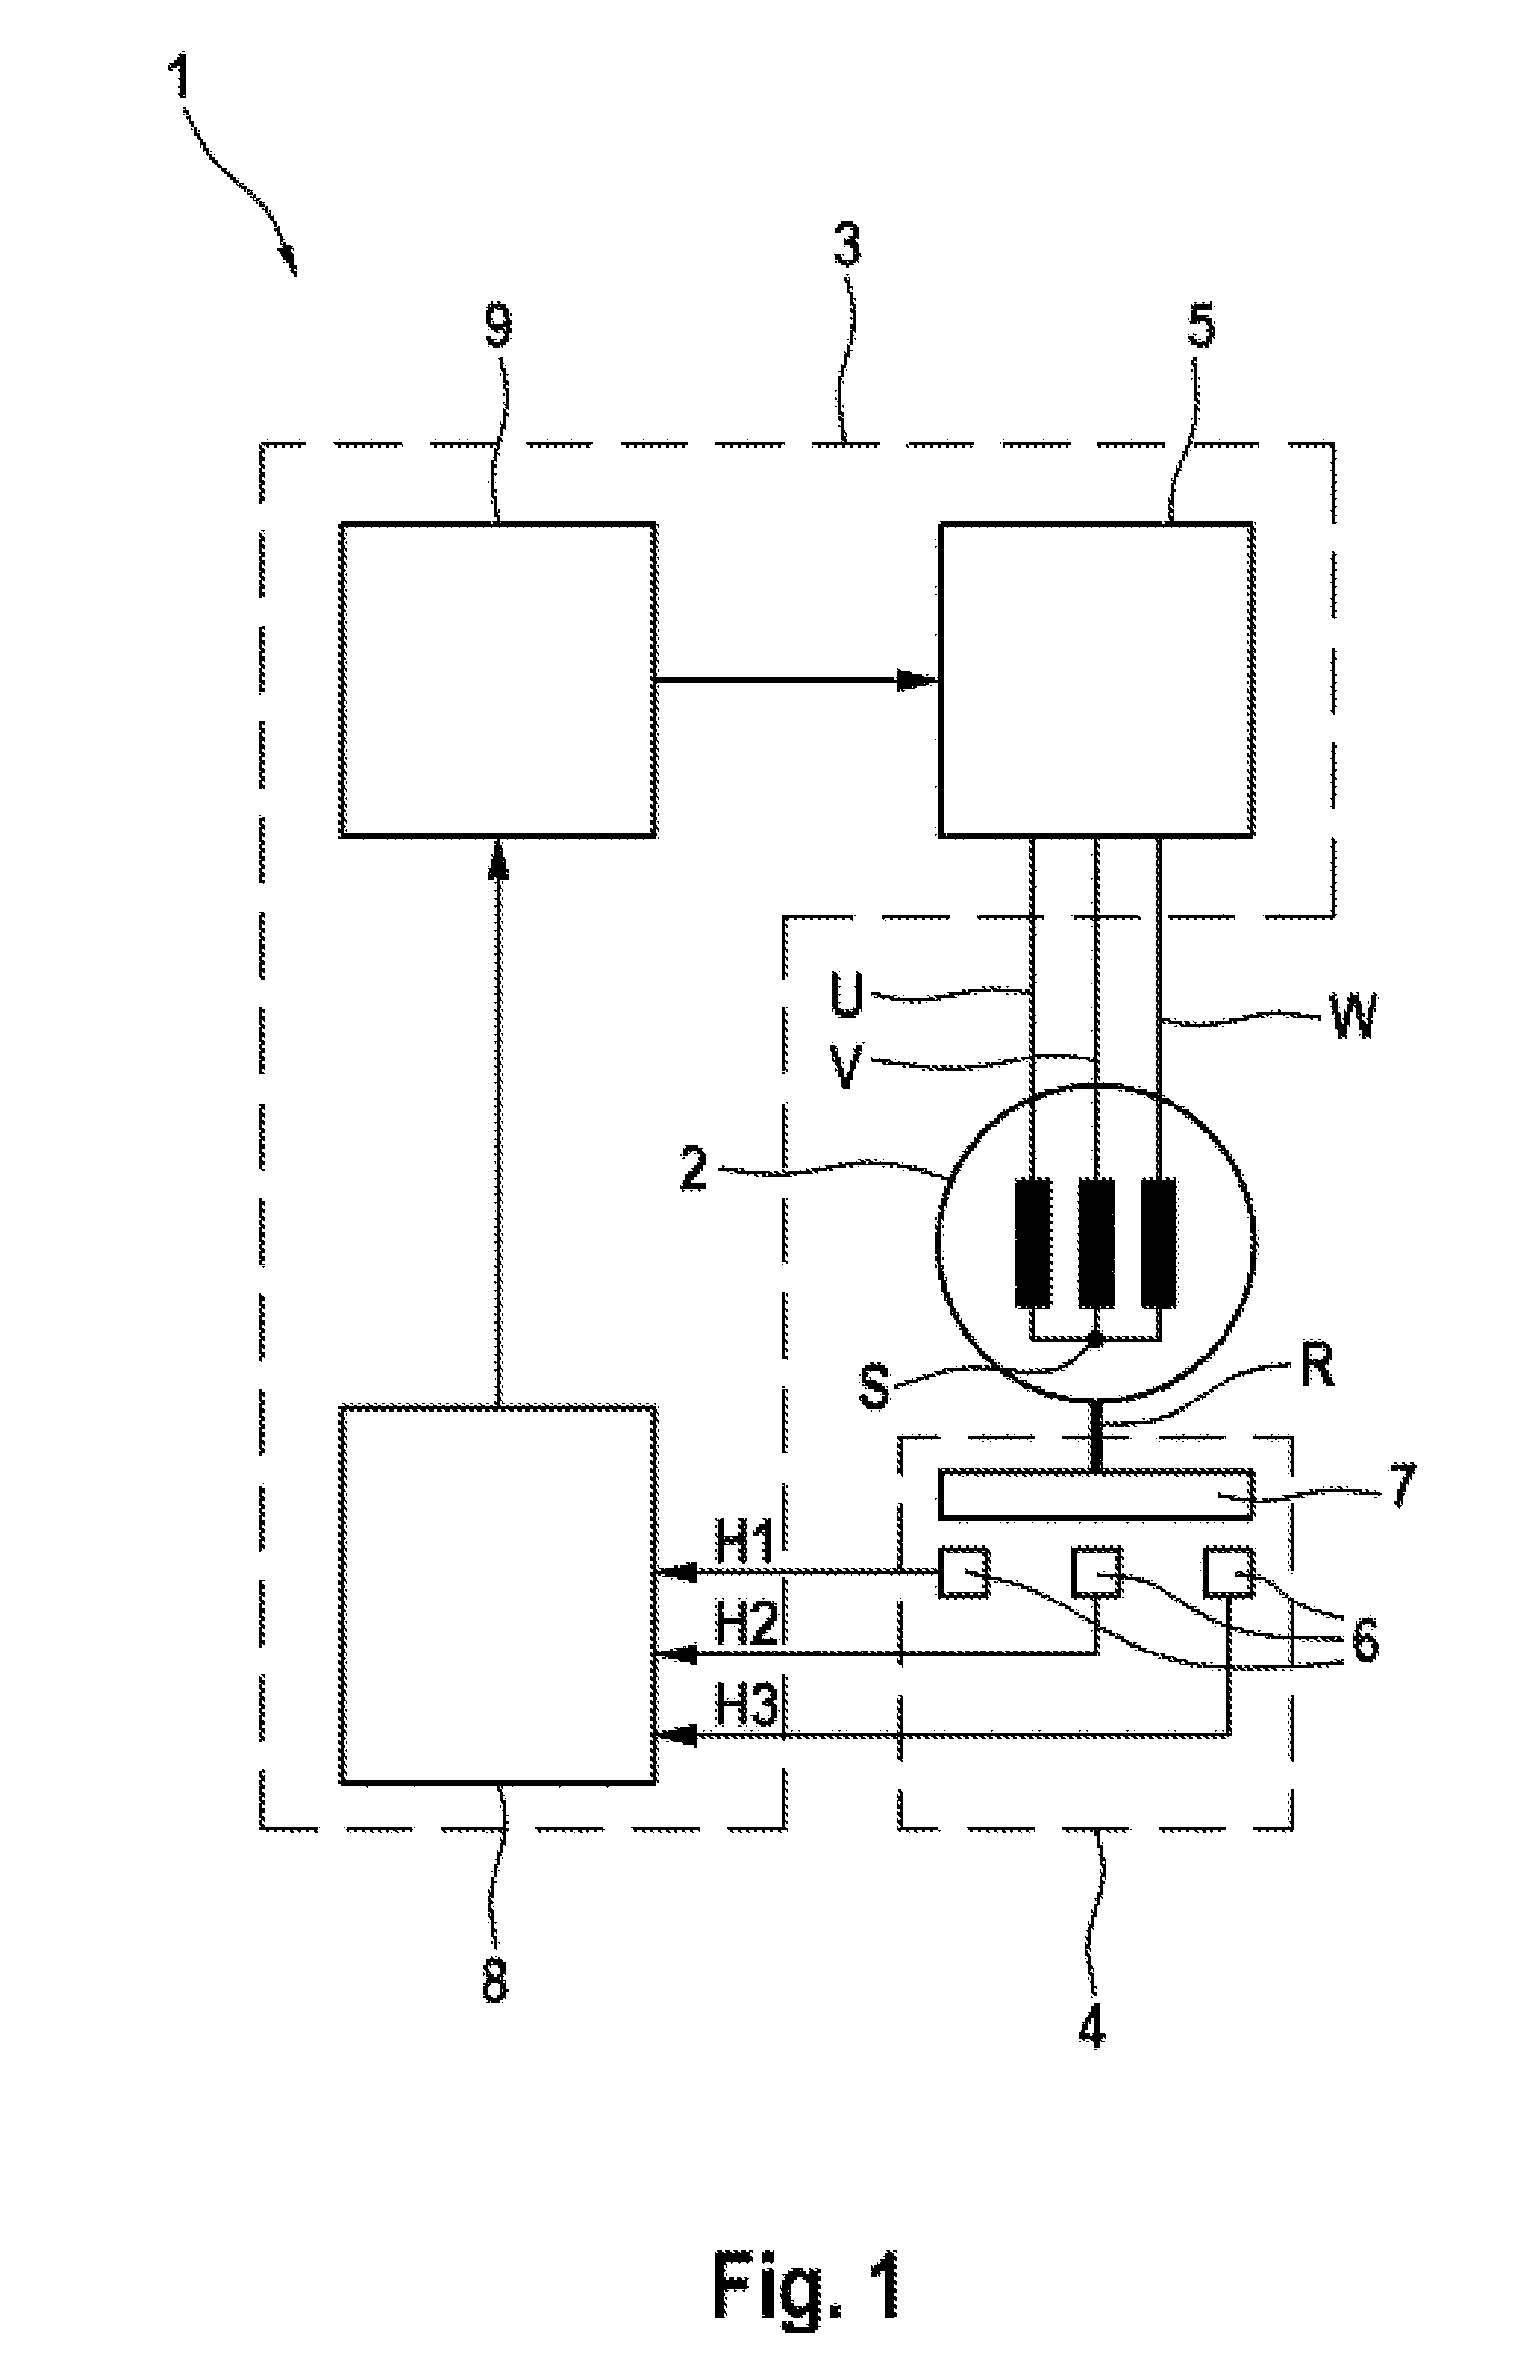 Method and circuit arrangement for checking the rotor position of a synchrounous machine